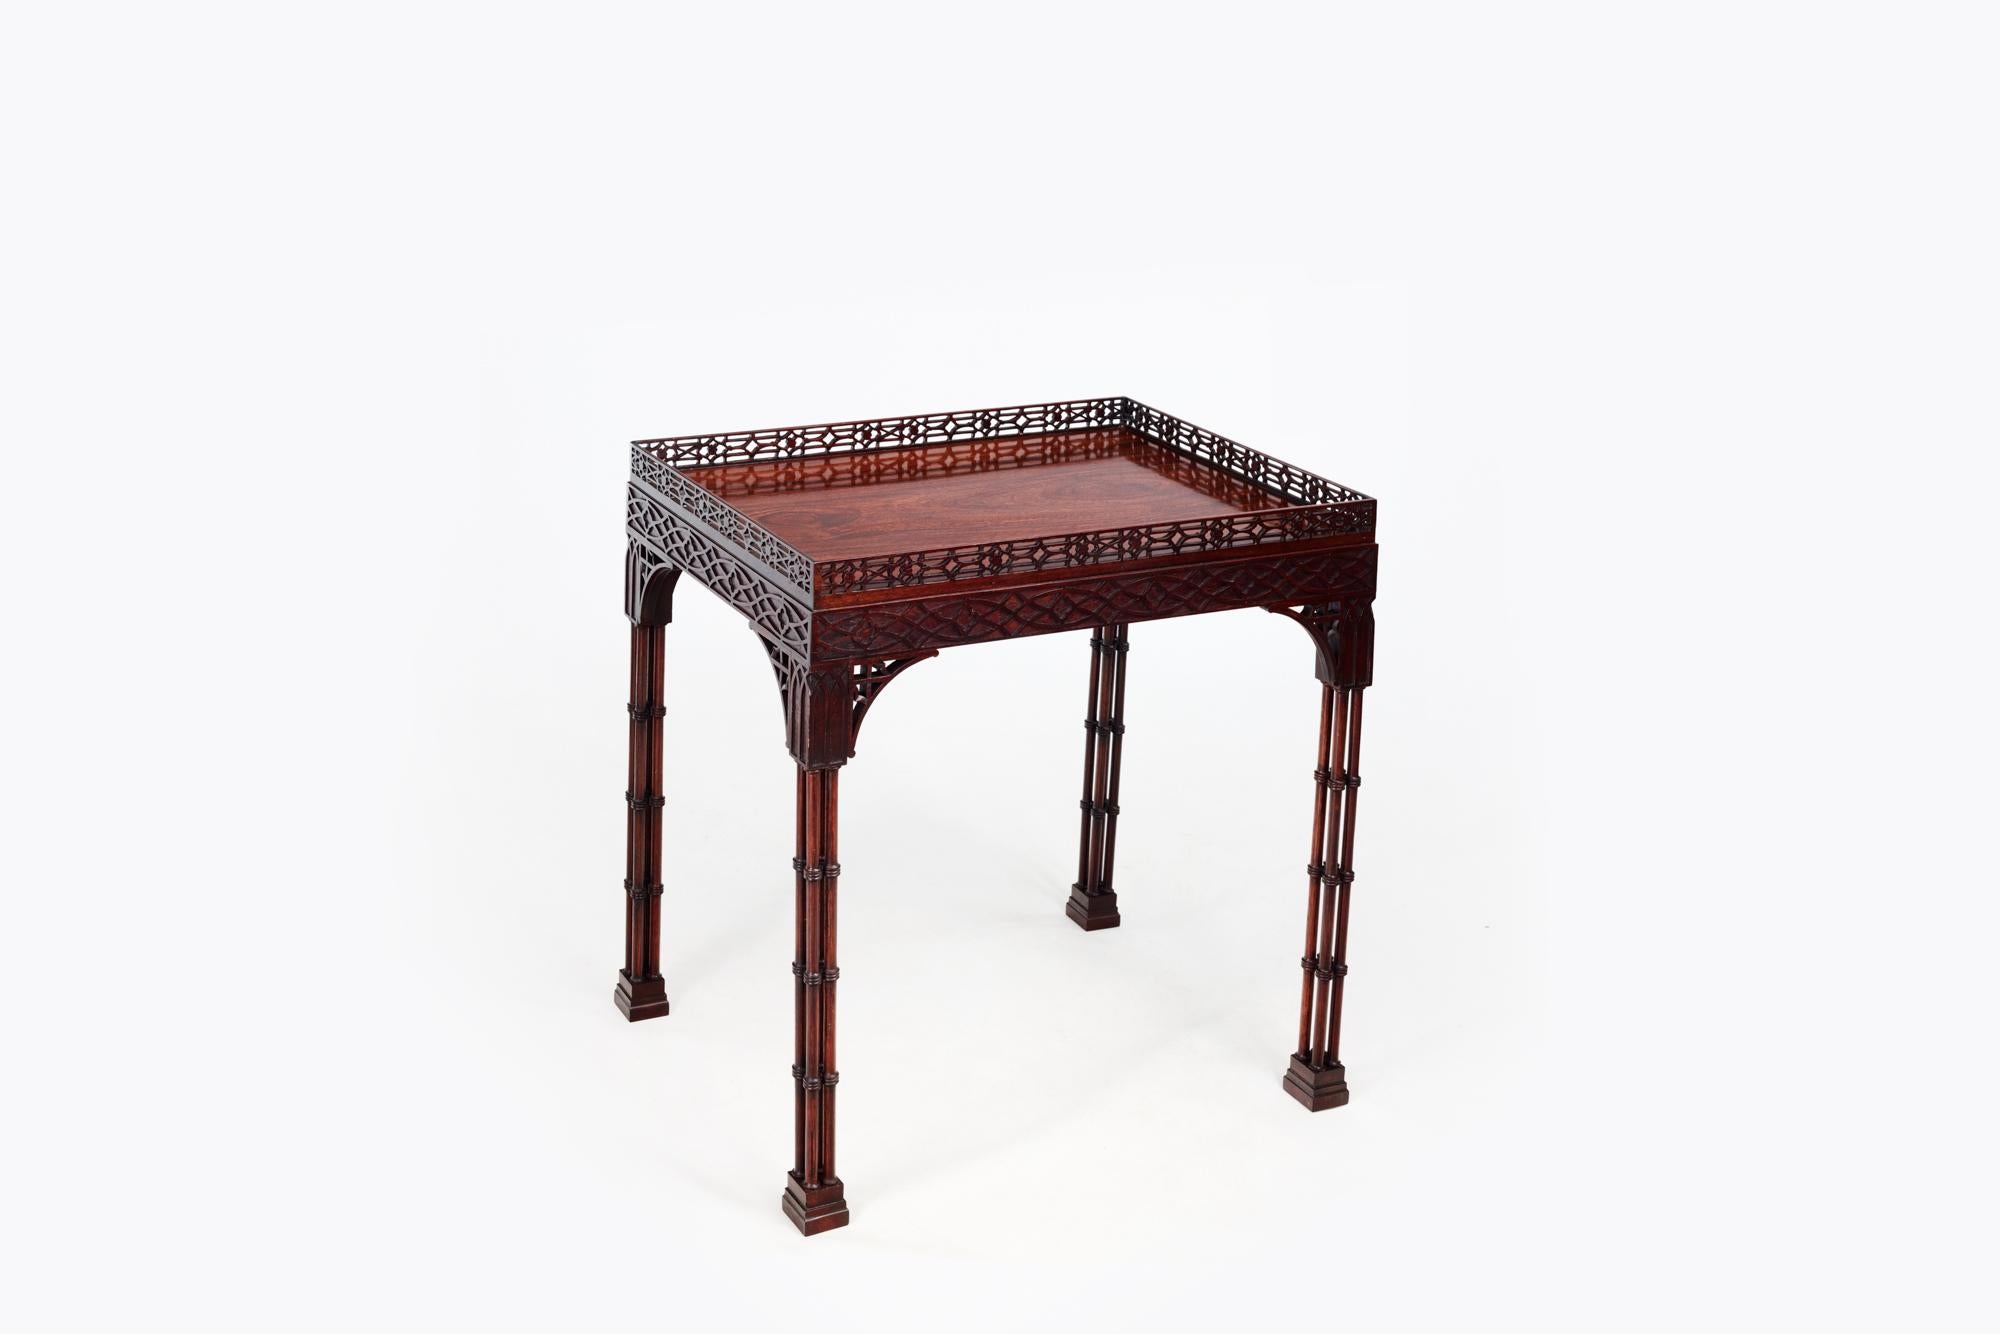 19th Century George III mahogany silver table in the Chinese Chippendale style. The pierced corner brackets support unusual cluster column legs and terminate on block feet. The rectangular top features a blind fretwork frieze on all four sides and